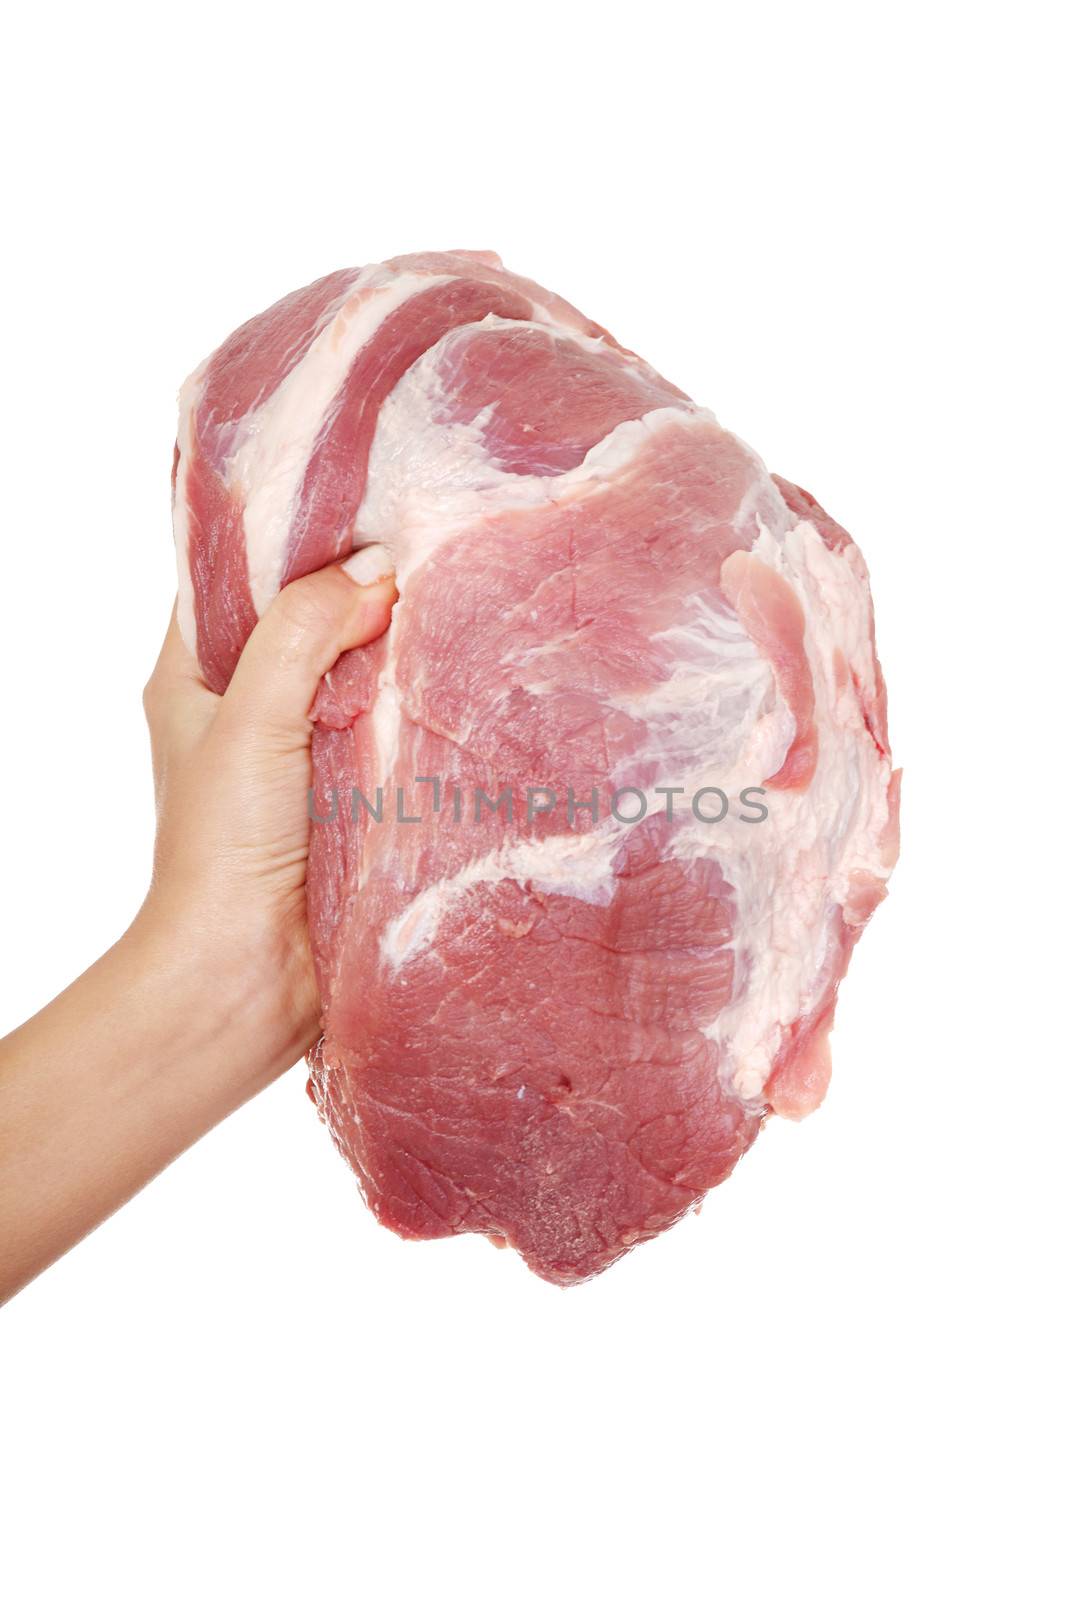 Female hand holding raw pork meat. Isolated on white